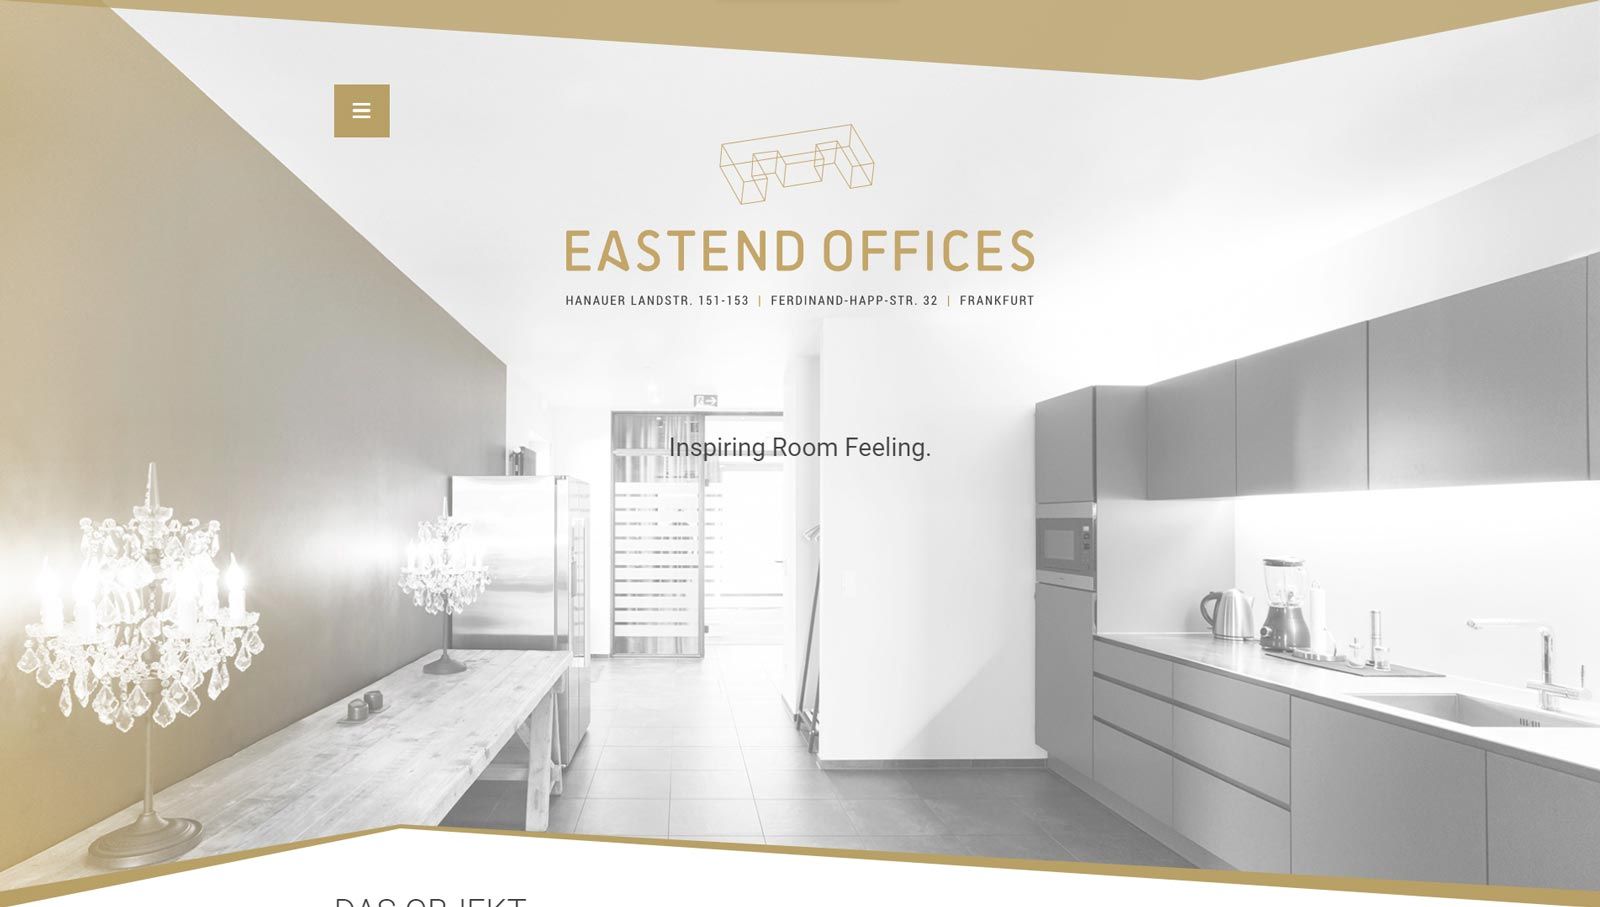 Eastend Offices